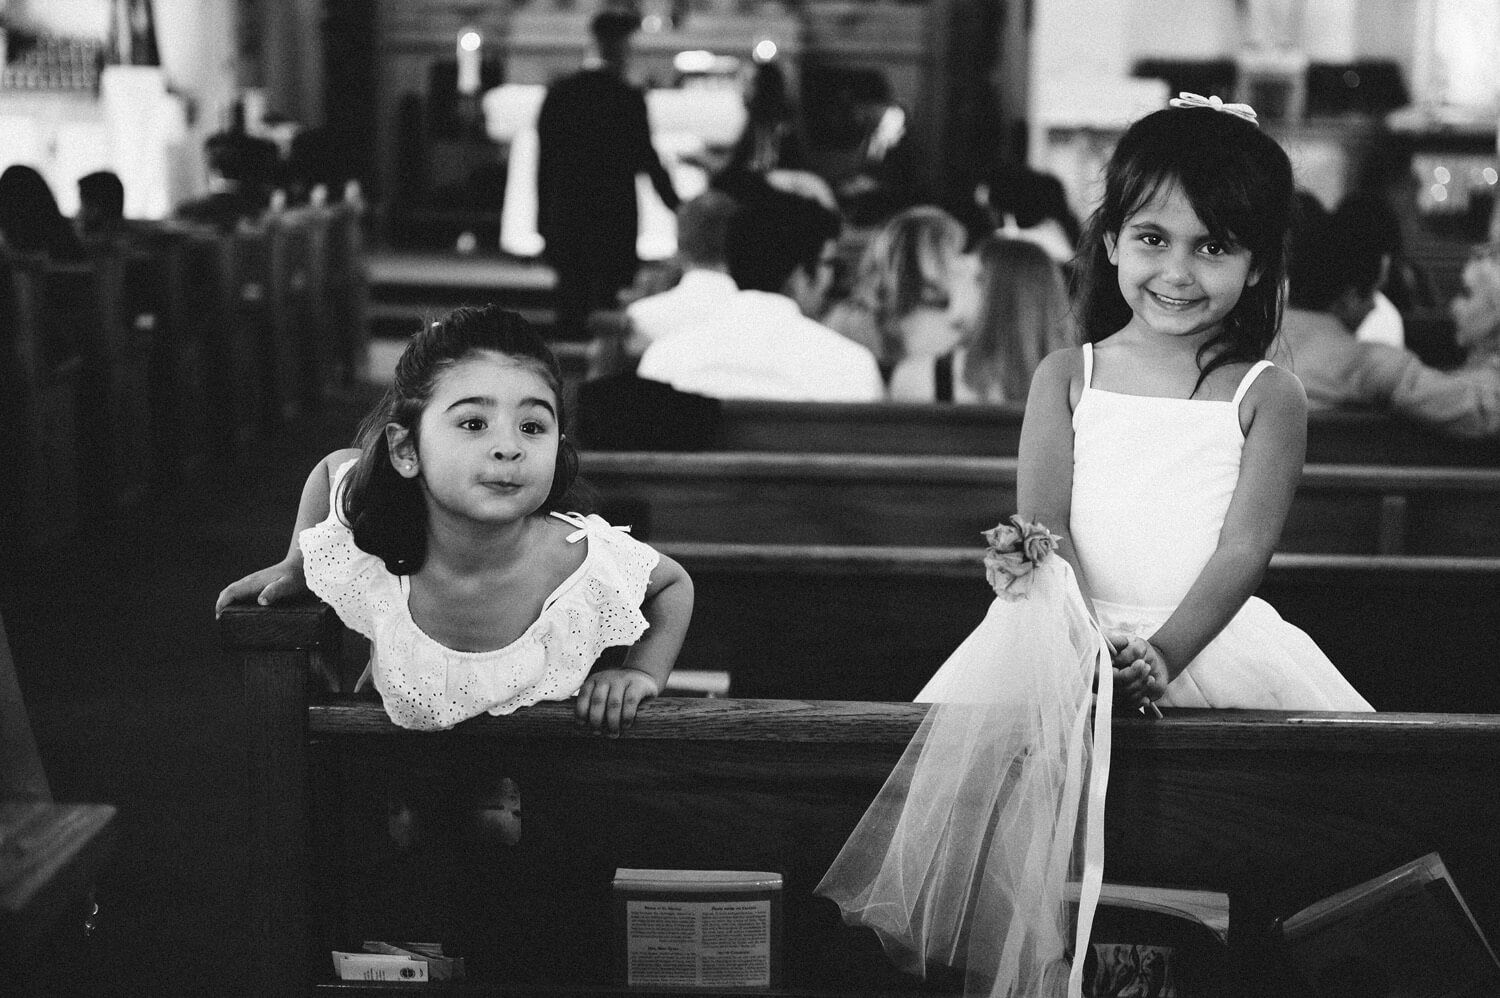 flower girls in white dresses stand in church pew and smile at camera